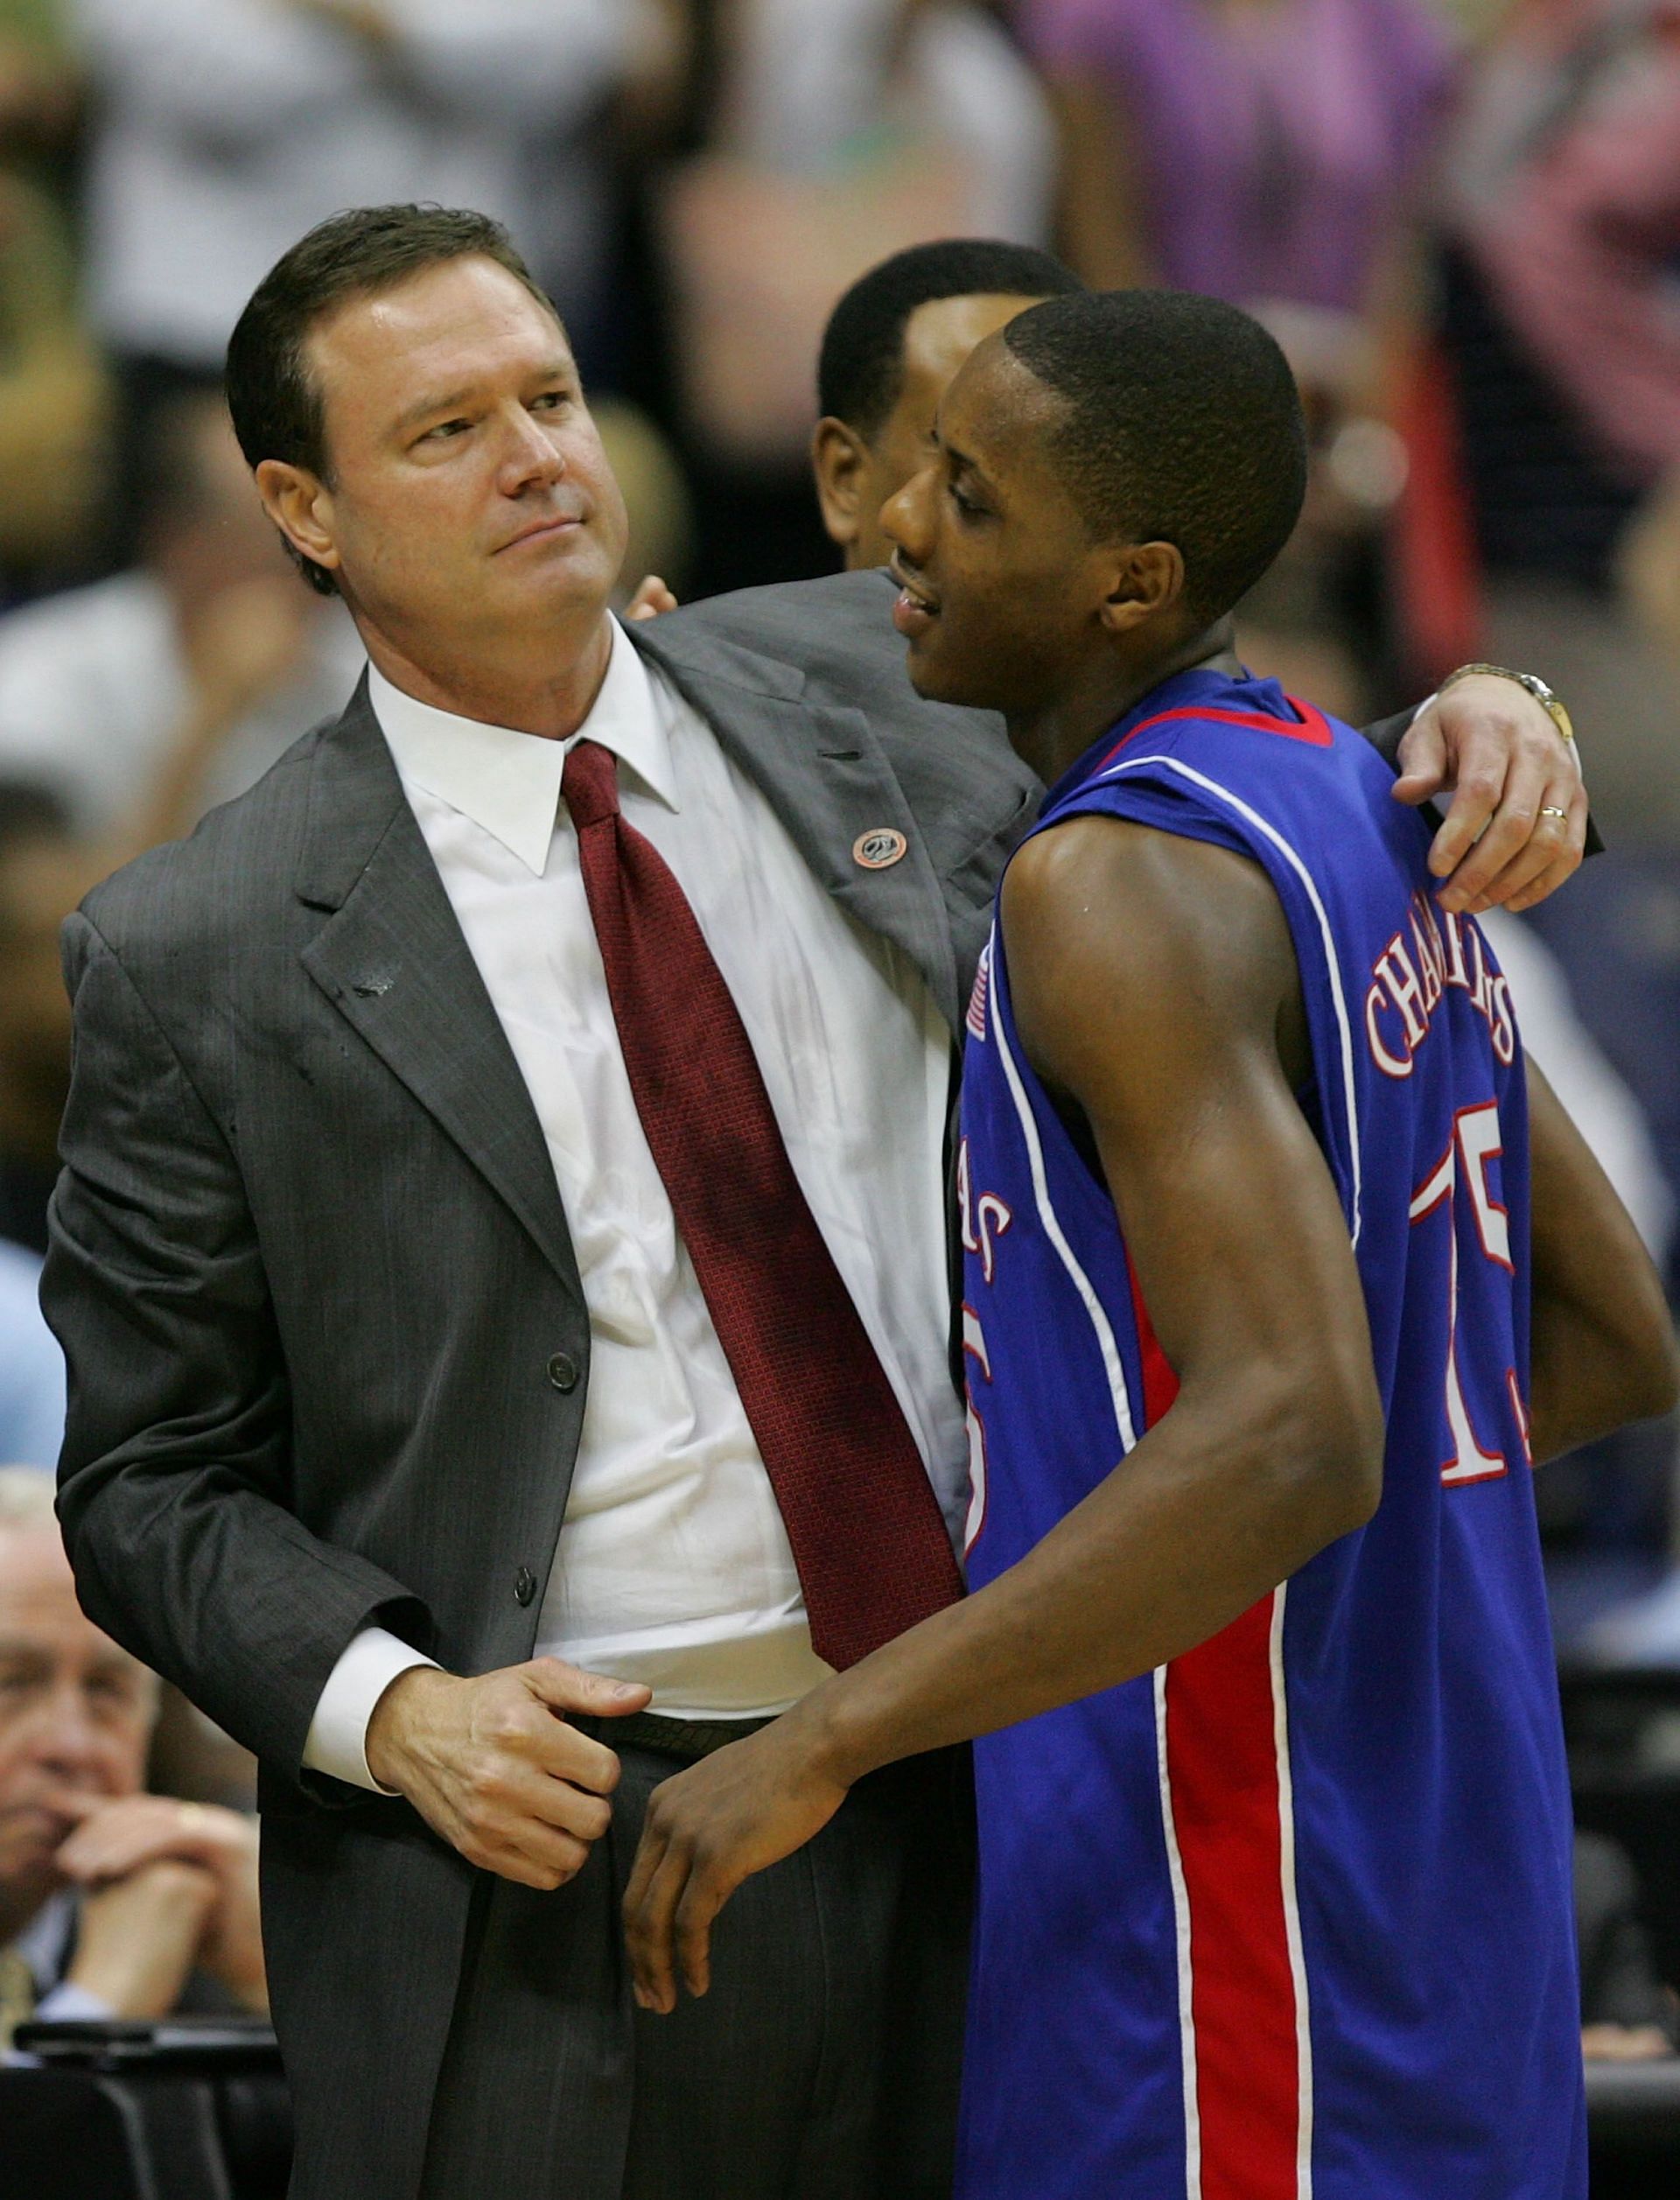 Mario Chalmers and coach Bill Self won the 2008 national championship.